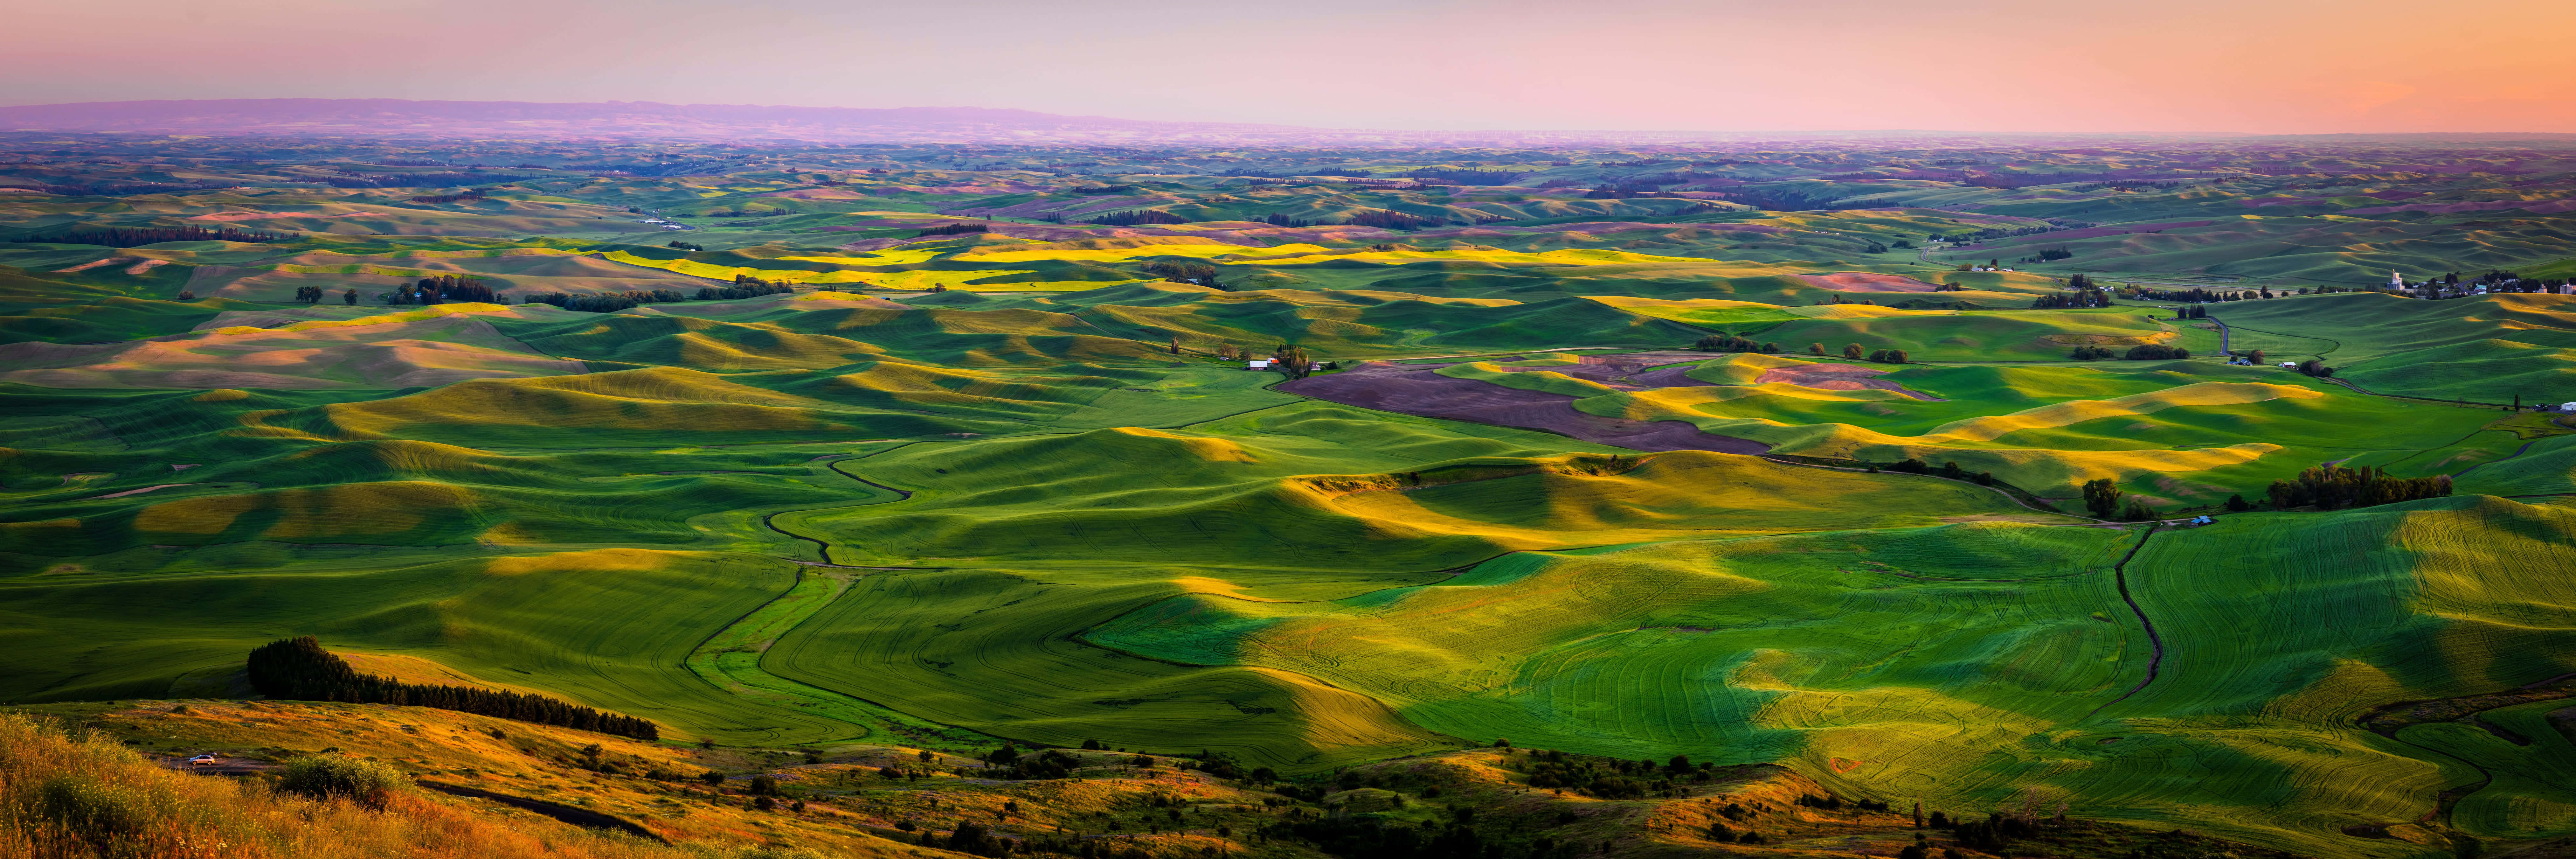 Green Hills And Valleys As A Panoramic Desktop Background